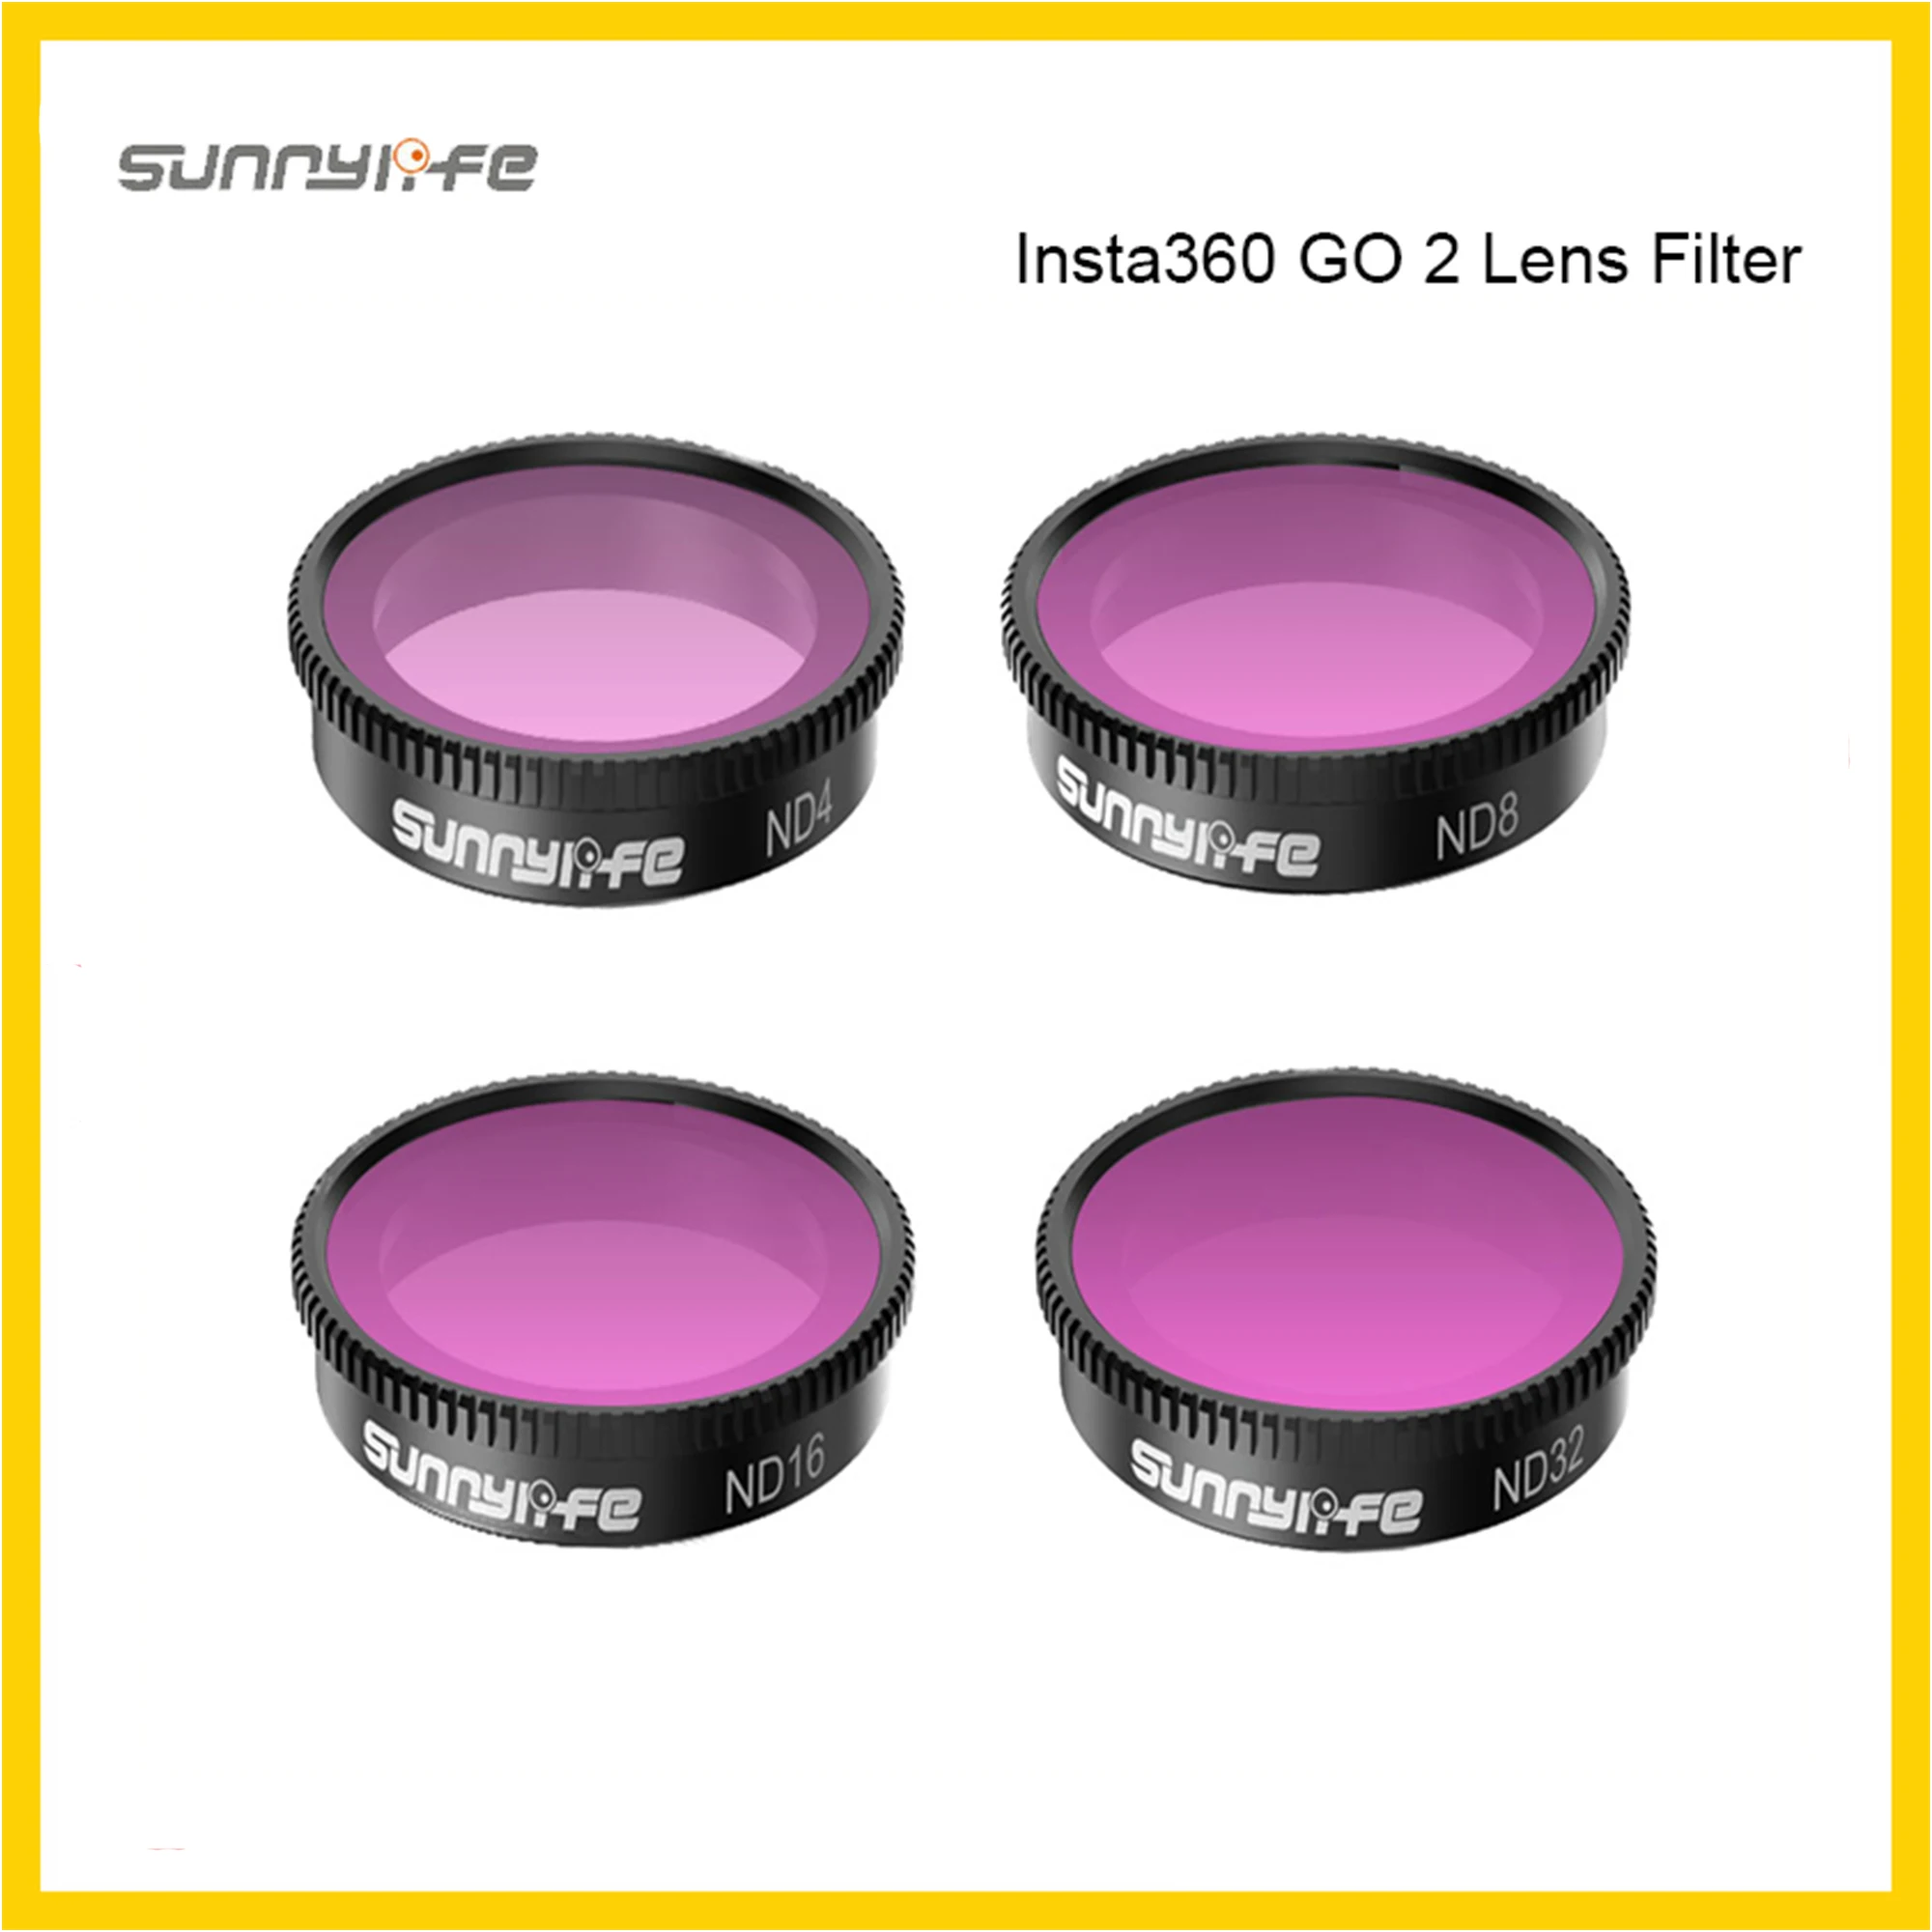 

Sunnylife Insta360 GO2 Lens Filter ND4 ND8 ND16 ND32 ND Set Filters ND4 8 16 32 For Insta360 GO 2 Action Camera Accessories